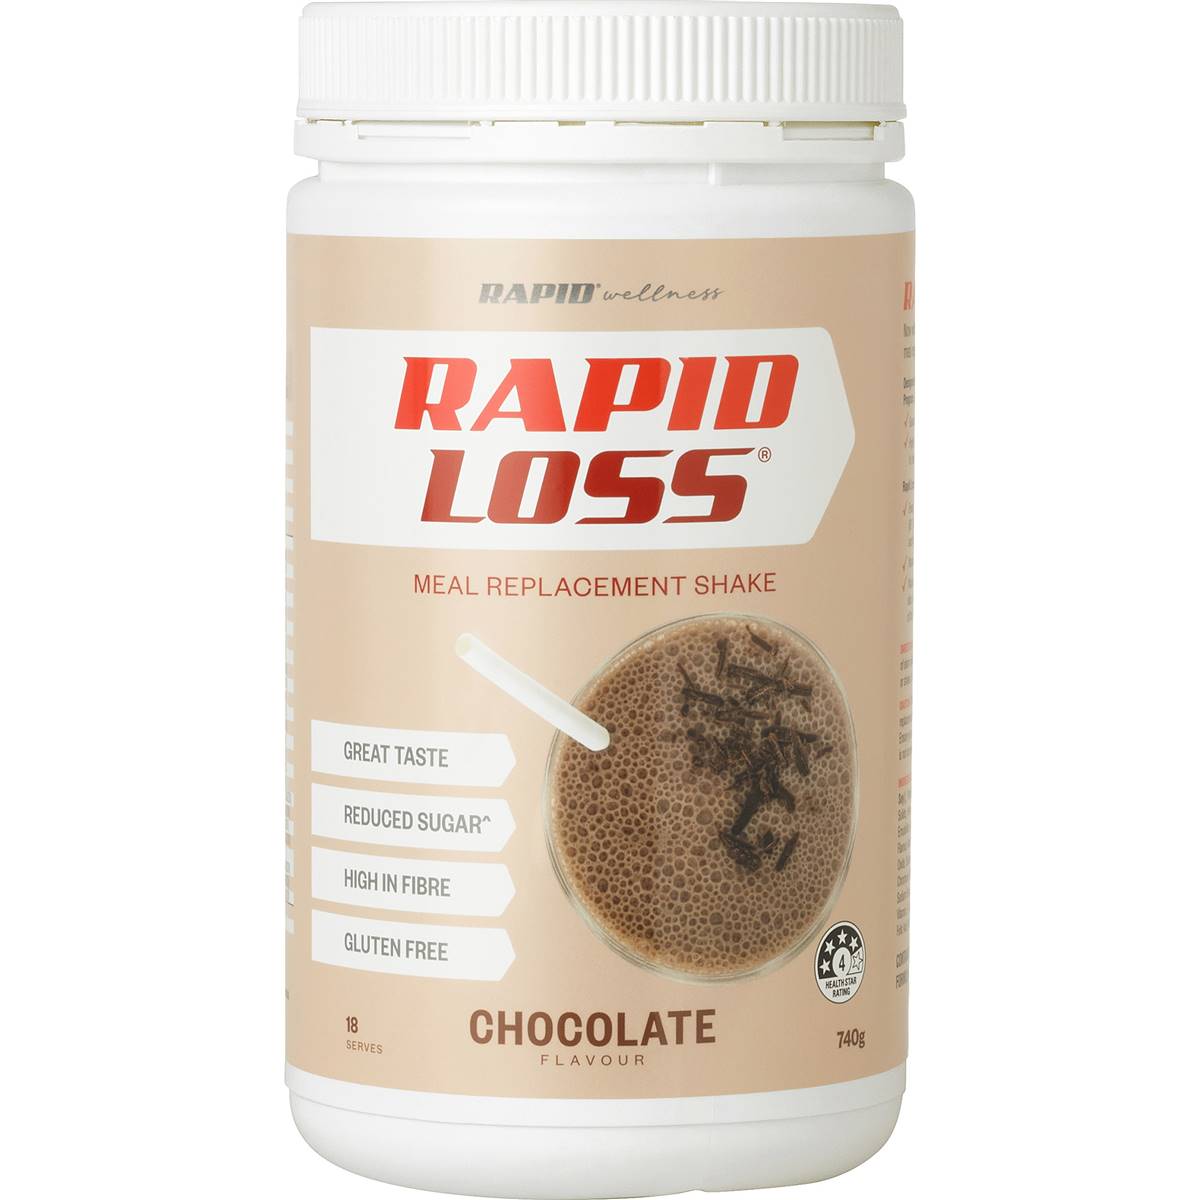 Calories in Rapid Loss Chocolate Flavour Meal Replacement Shake